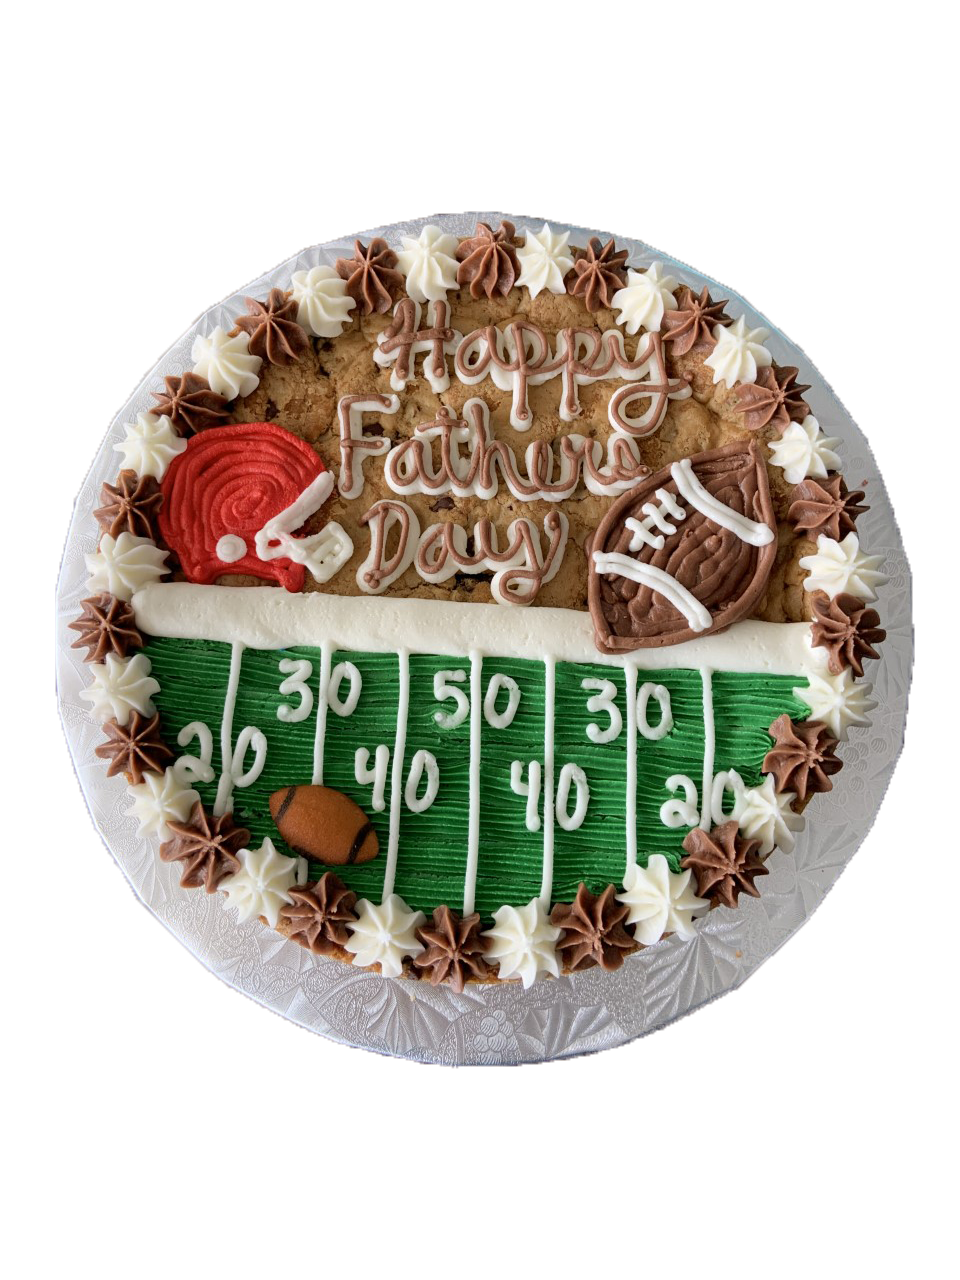 Football Cake and Cookies | Simply Sweet Creations | Flickr